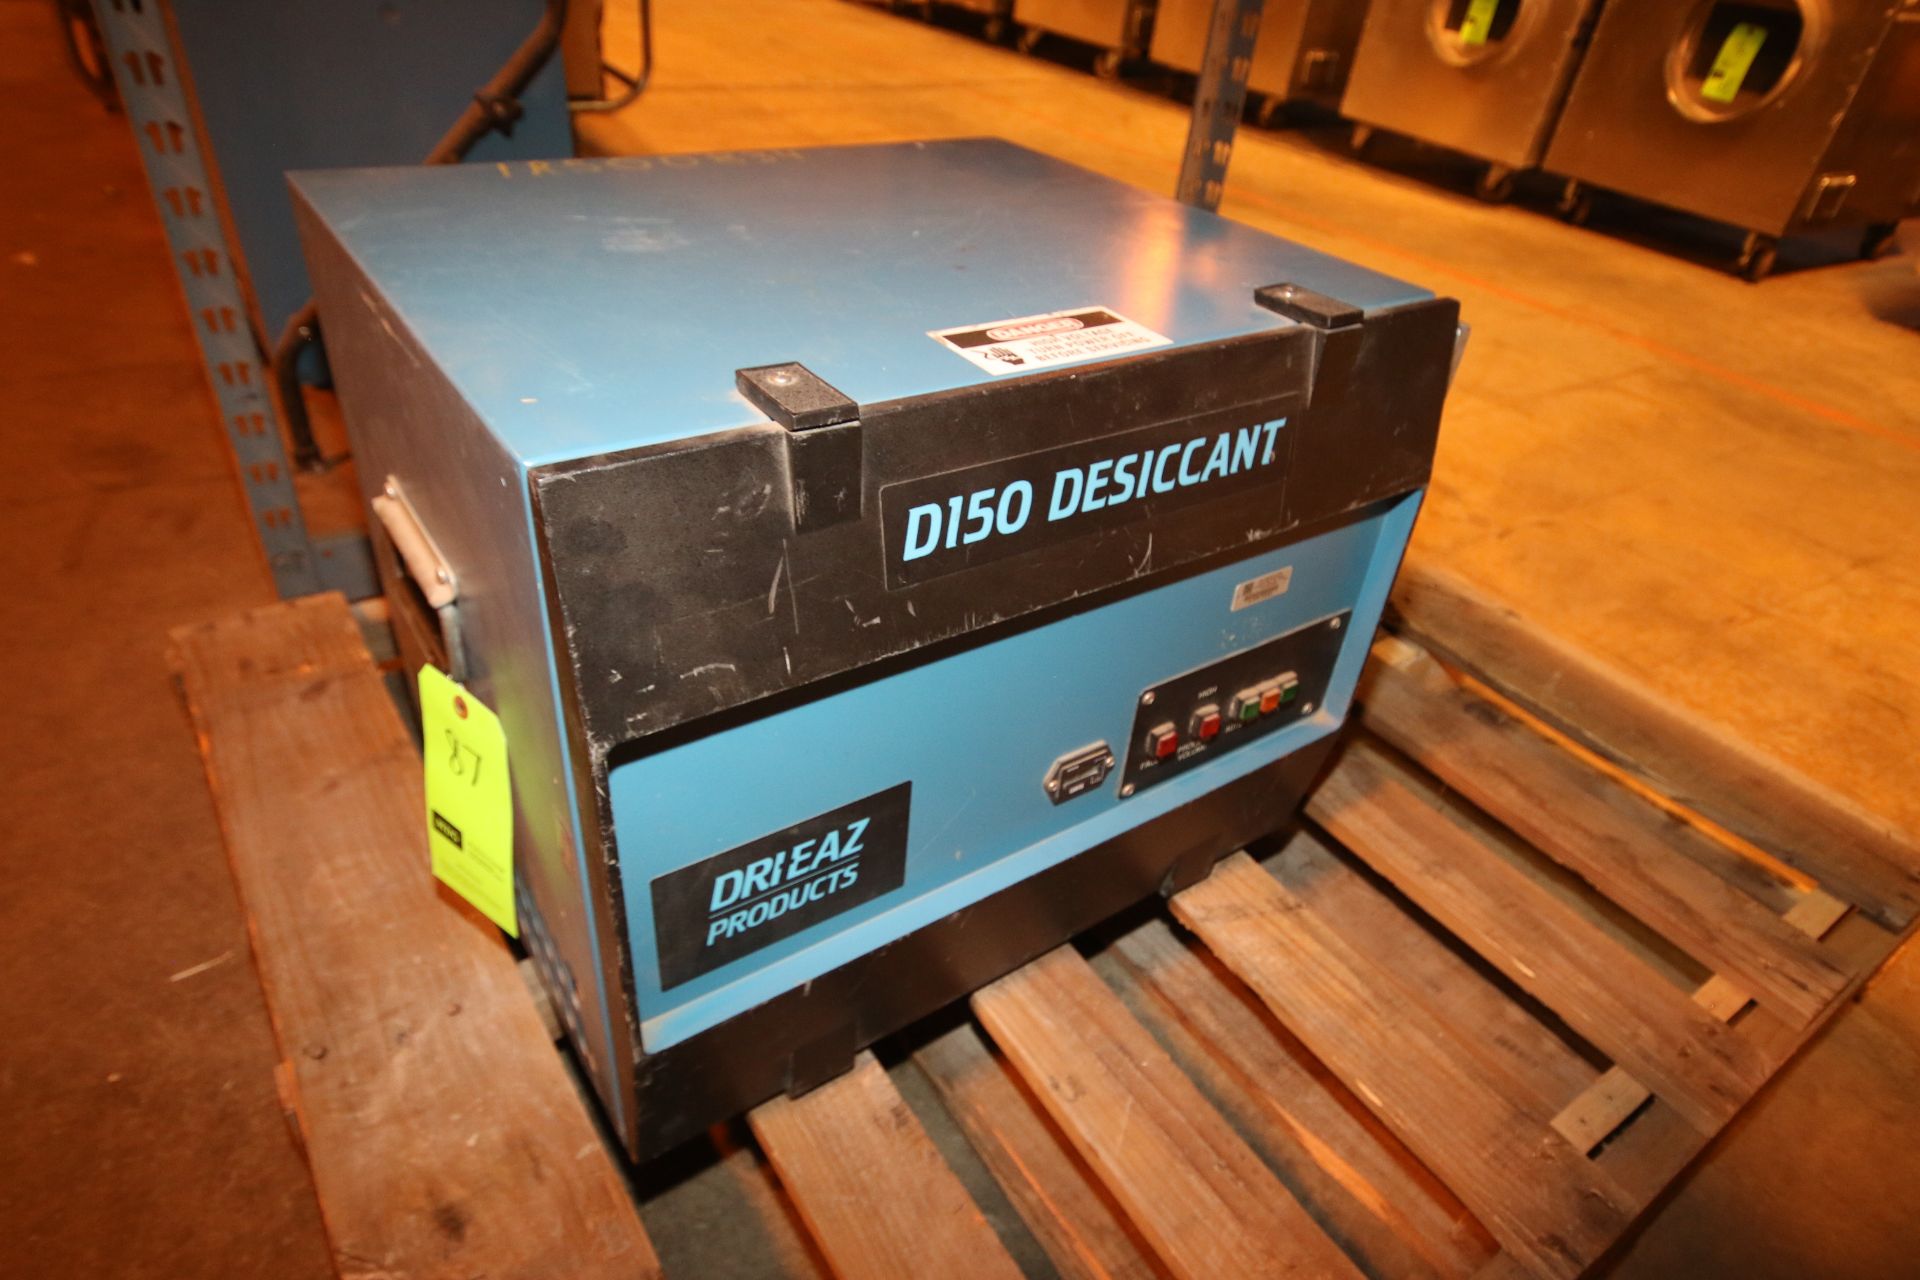 Drieaz Products D150 Desiccant Dehumidifier, Model HC-150RS, S/N 102/H.92, 120/120 V, Single Phase